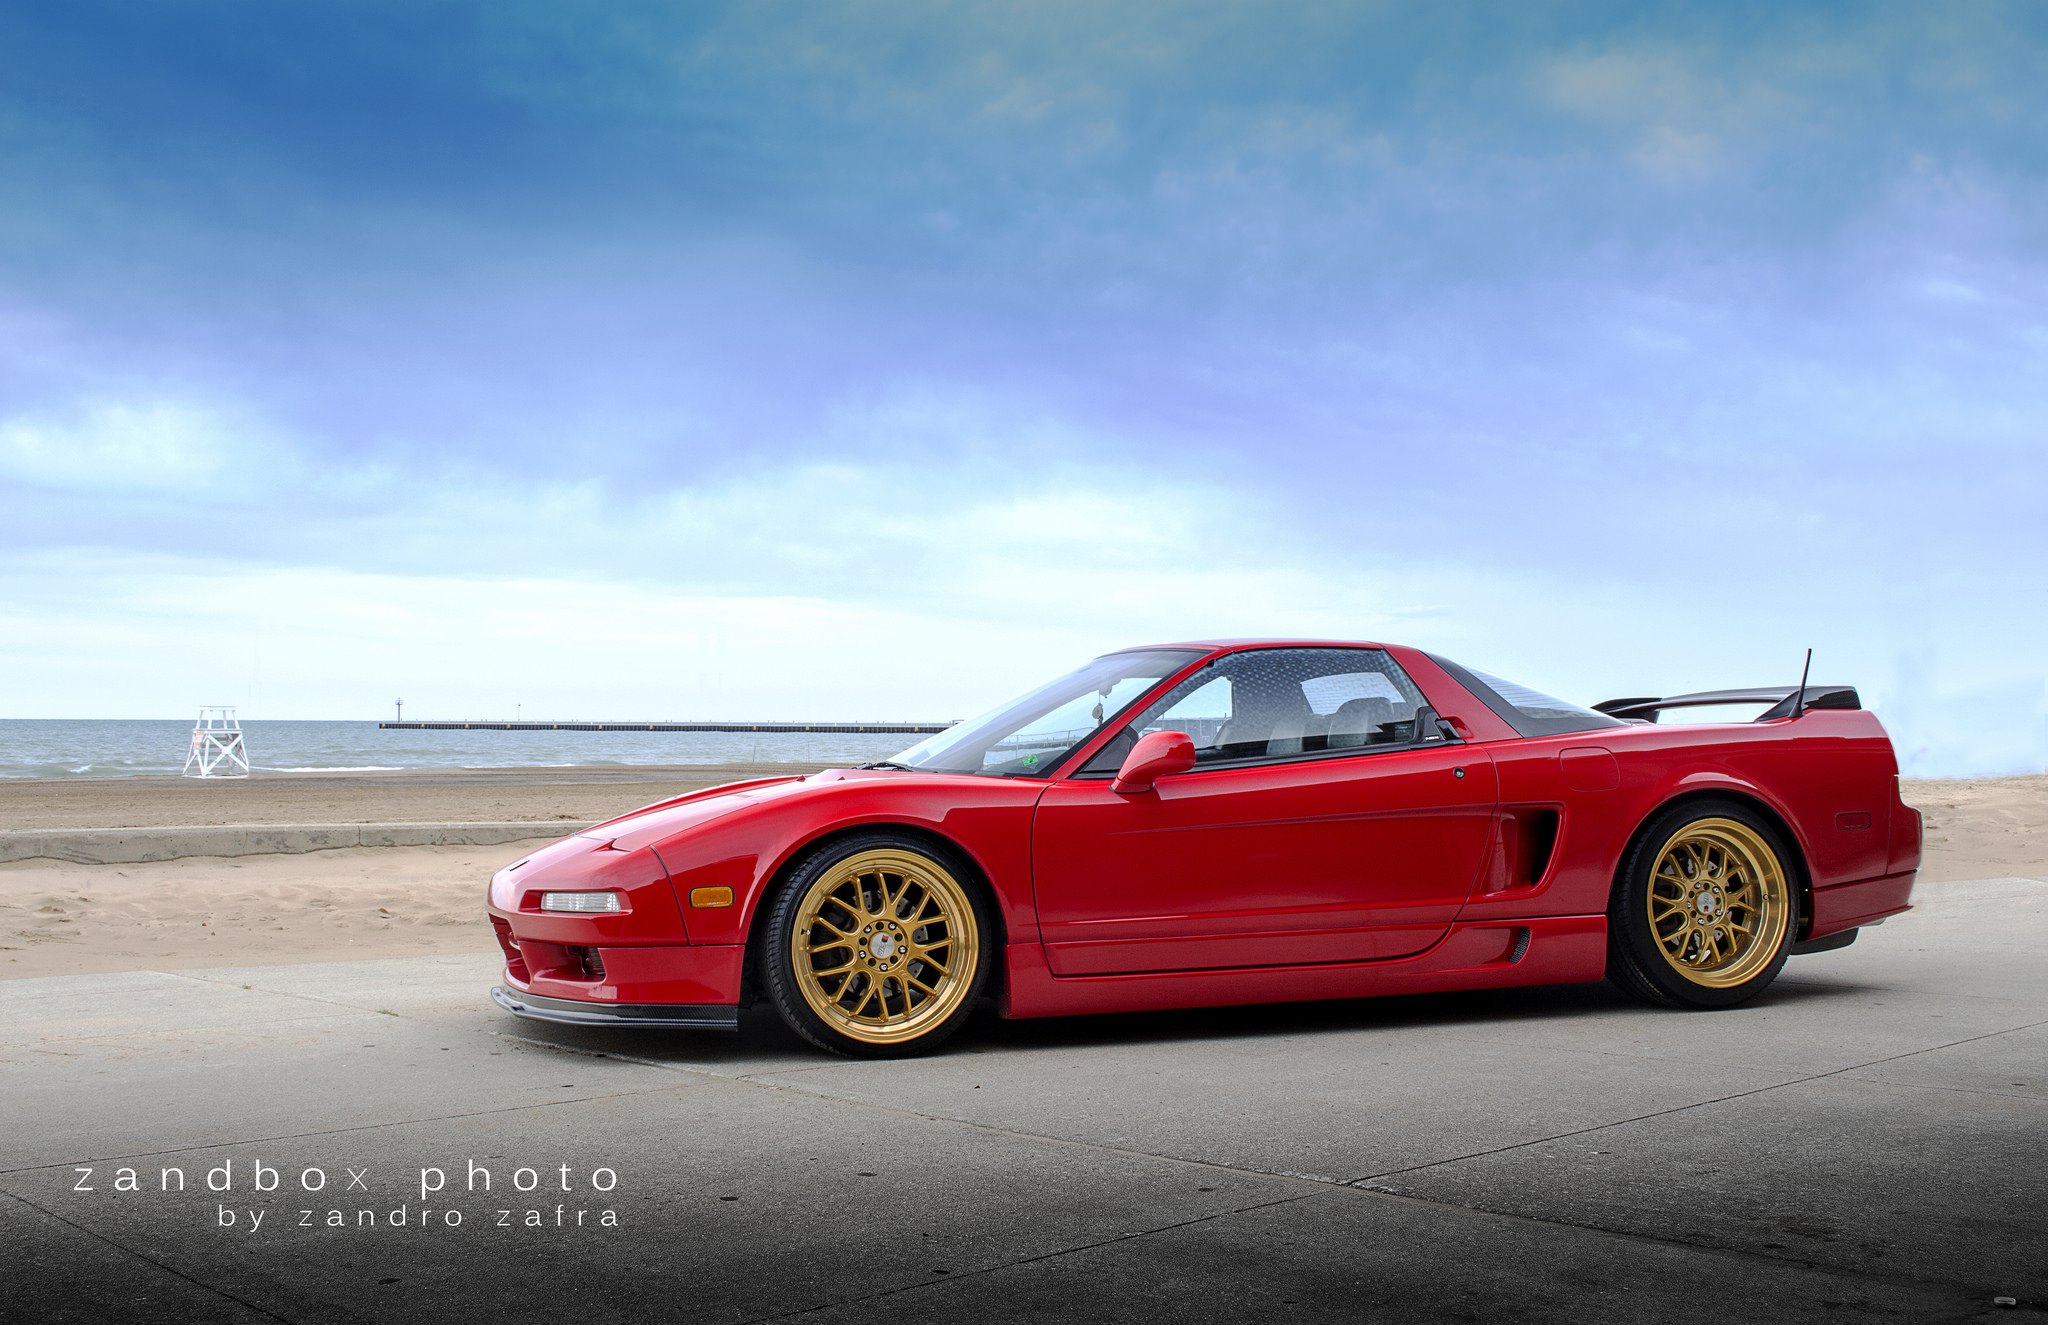 Red Acura NSX with Aftermarket Side Scoops - Photo by zandbox